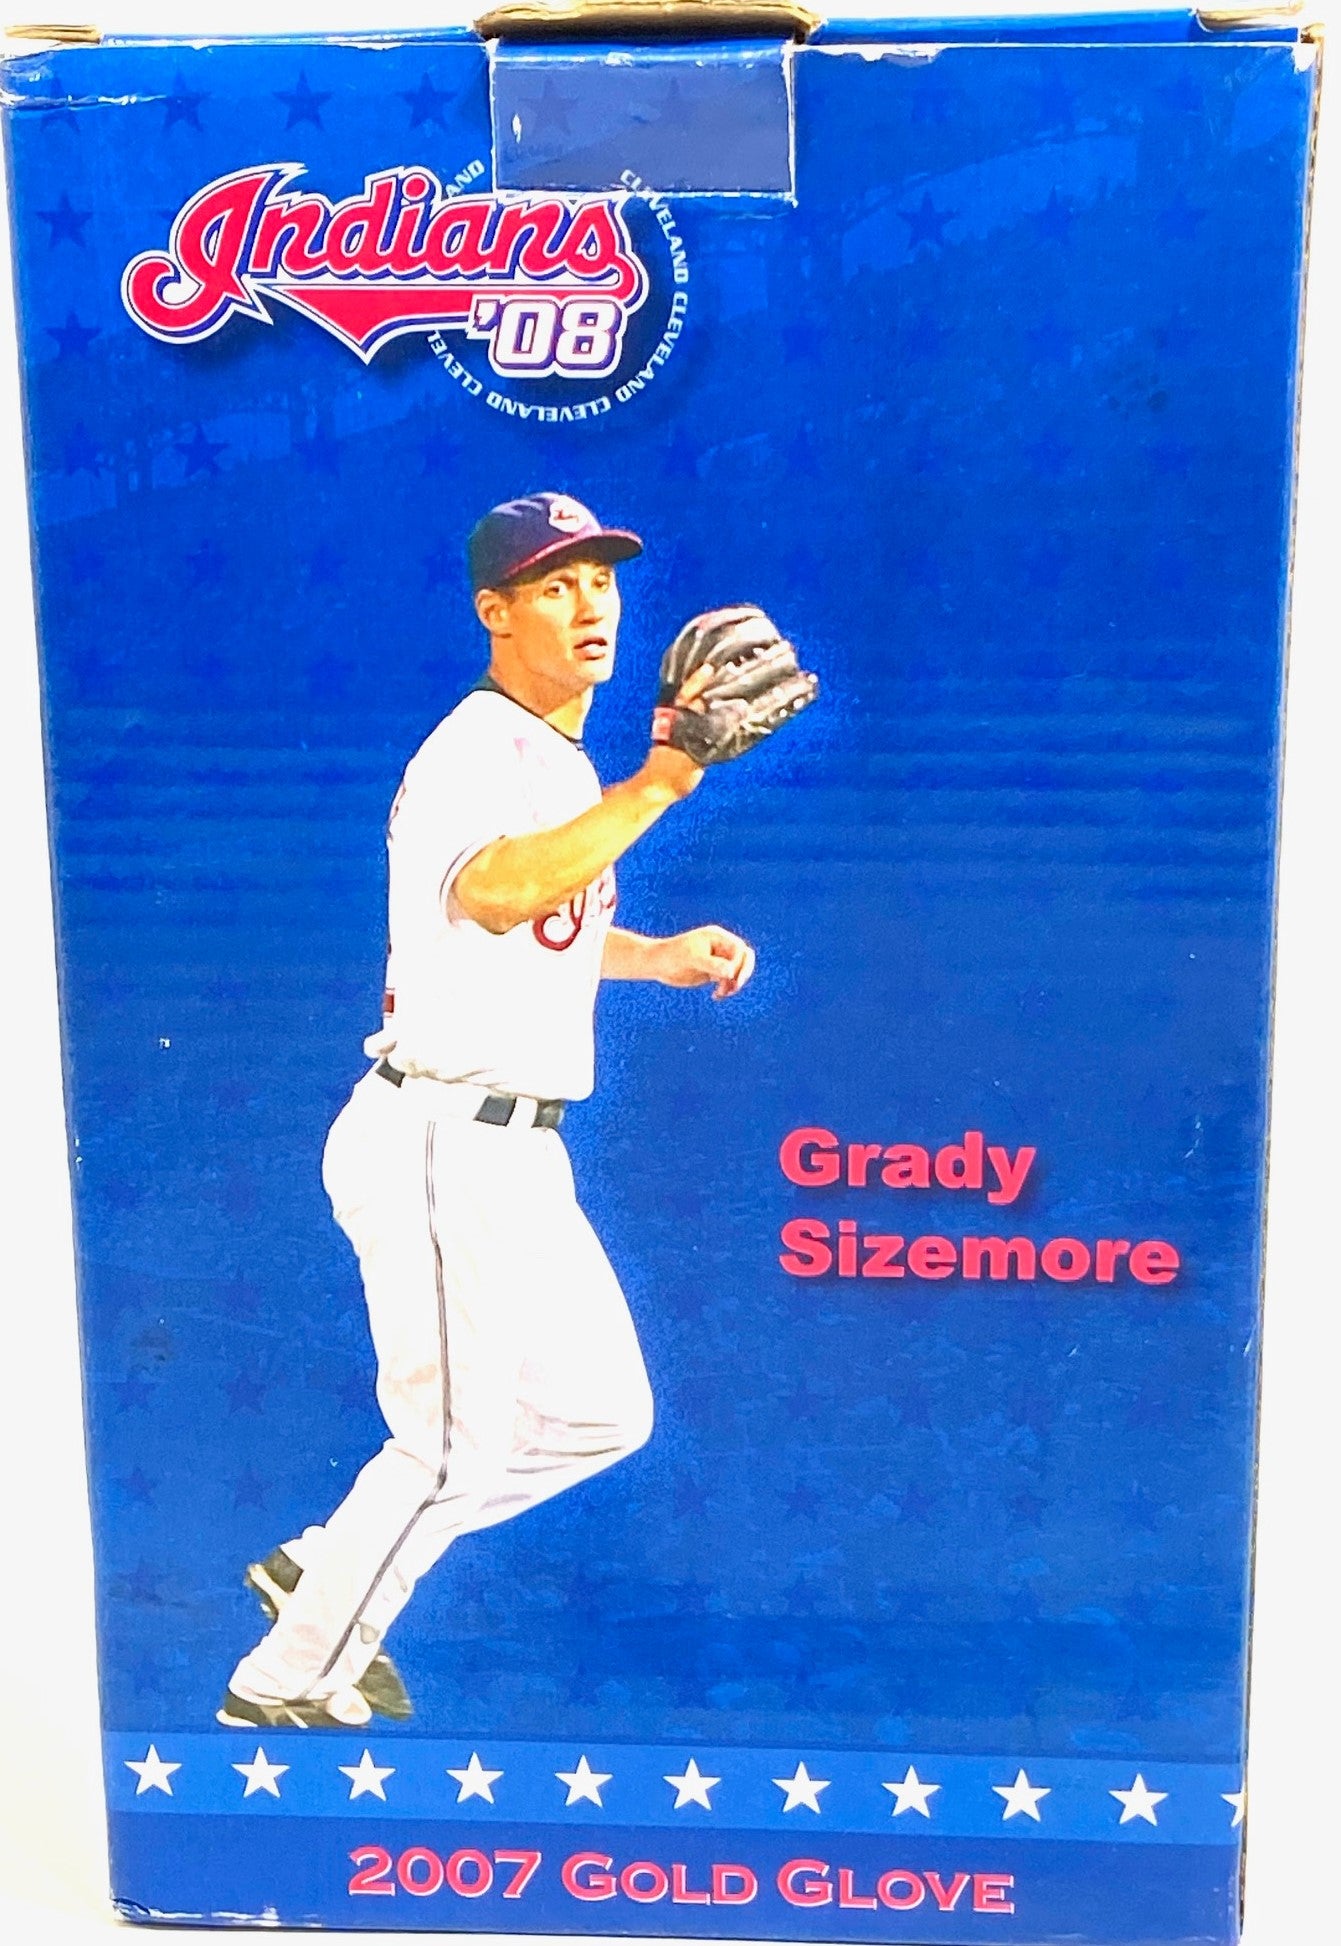 grady sizemore indians jersey